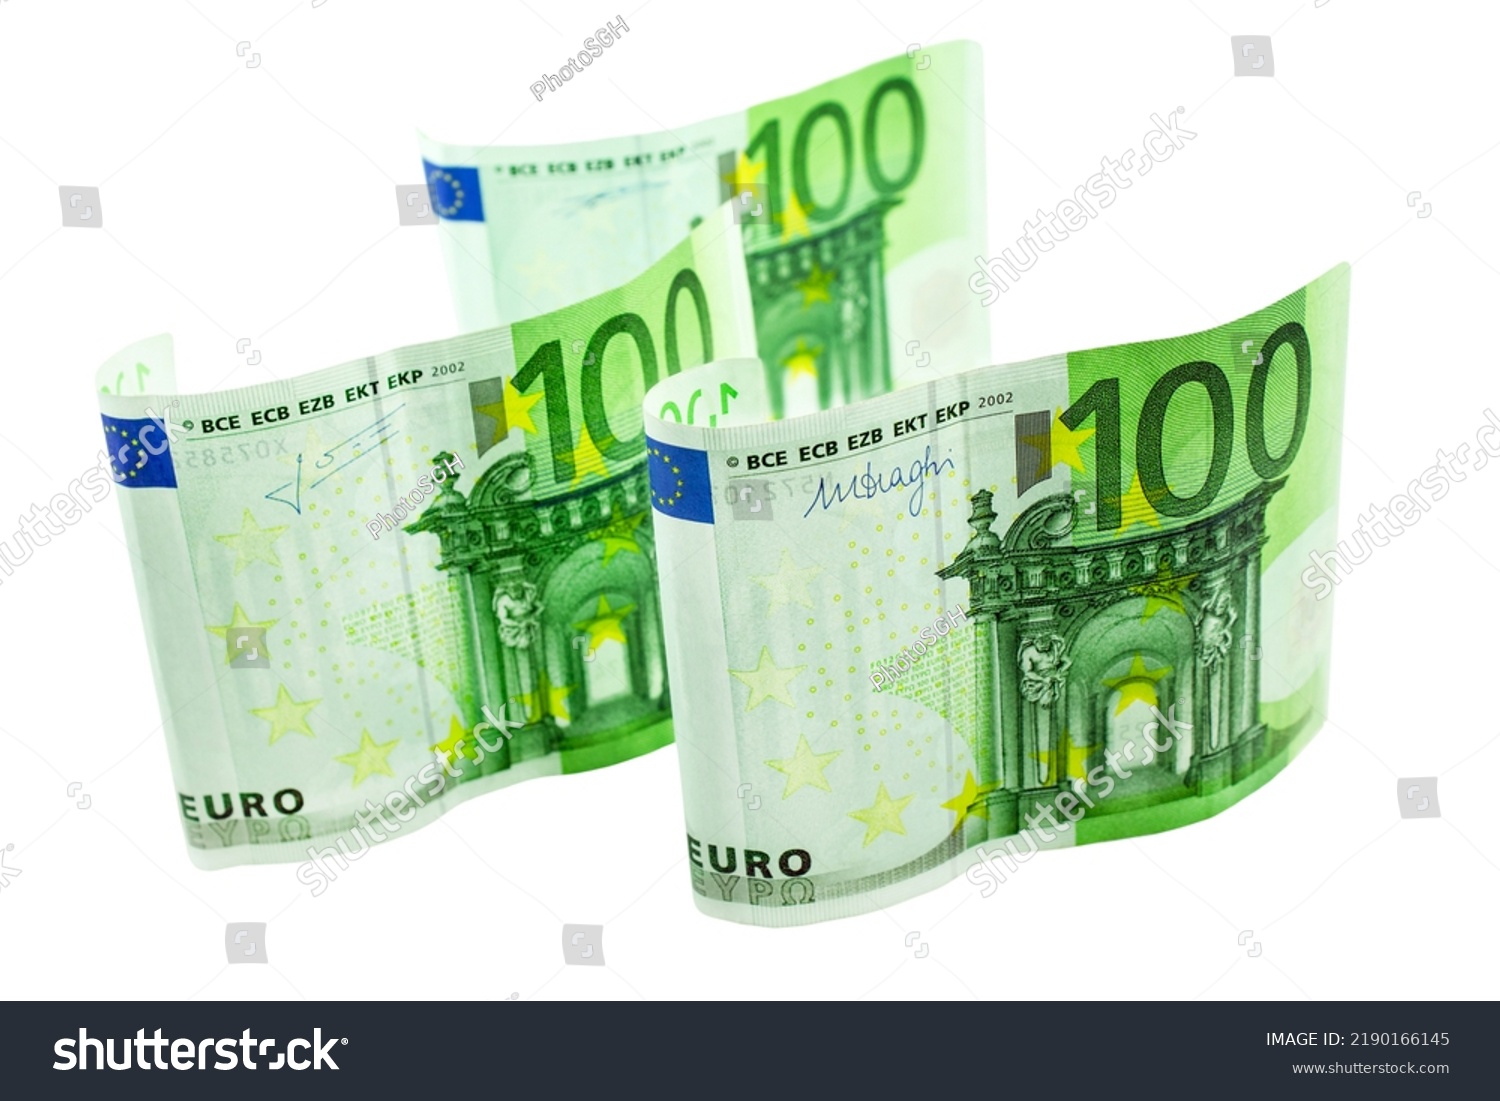 300 Euro banknotes isolated against white background #2190166145